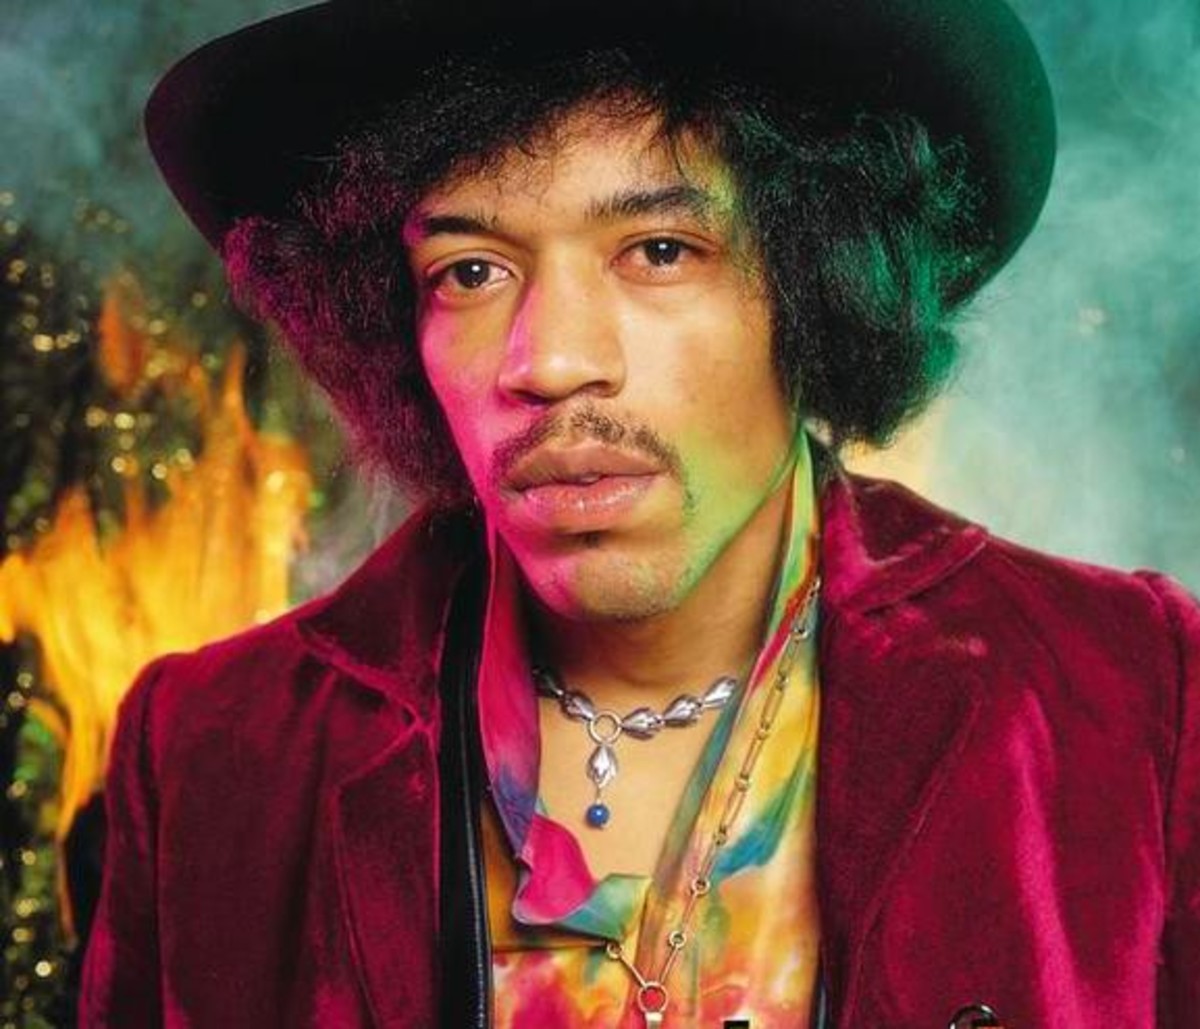 27 Things You Probably Didn't Know About Jimi Hendrix